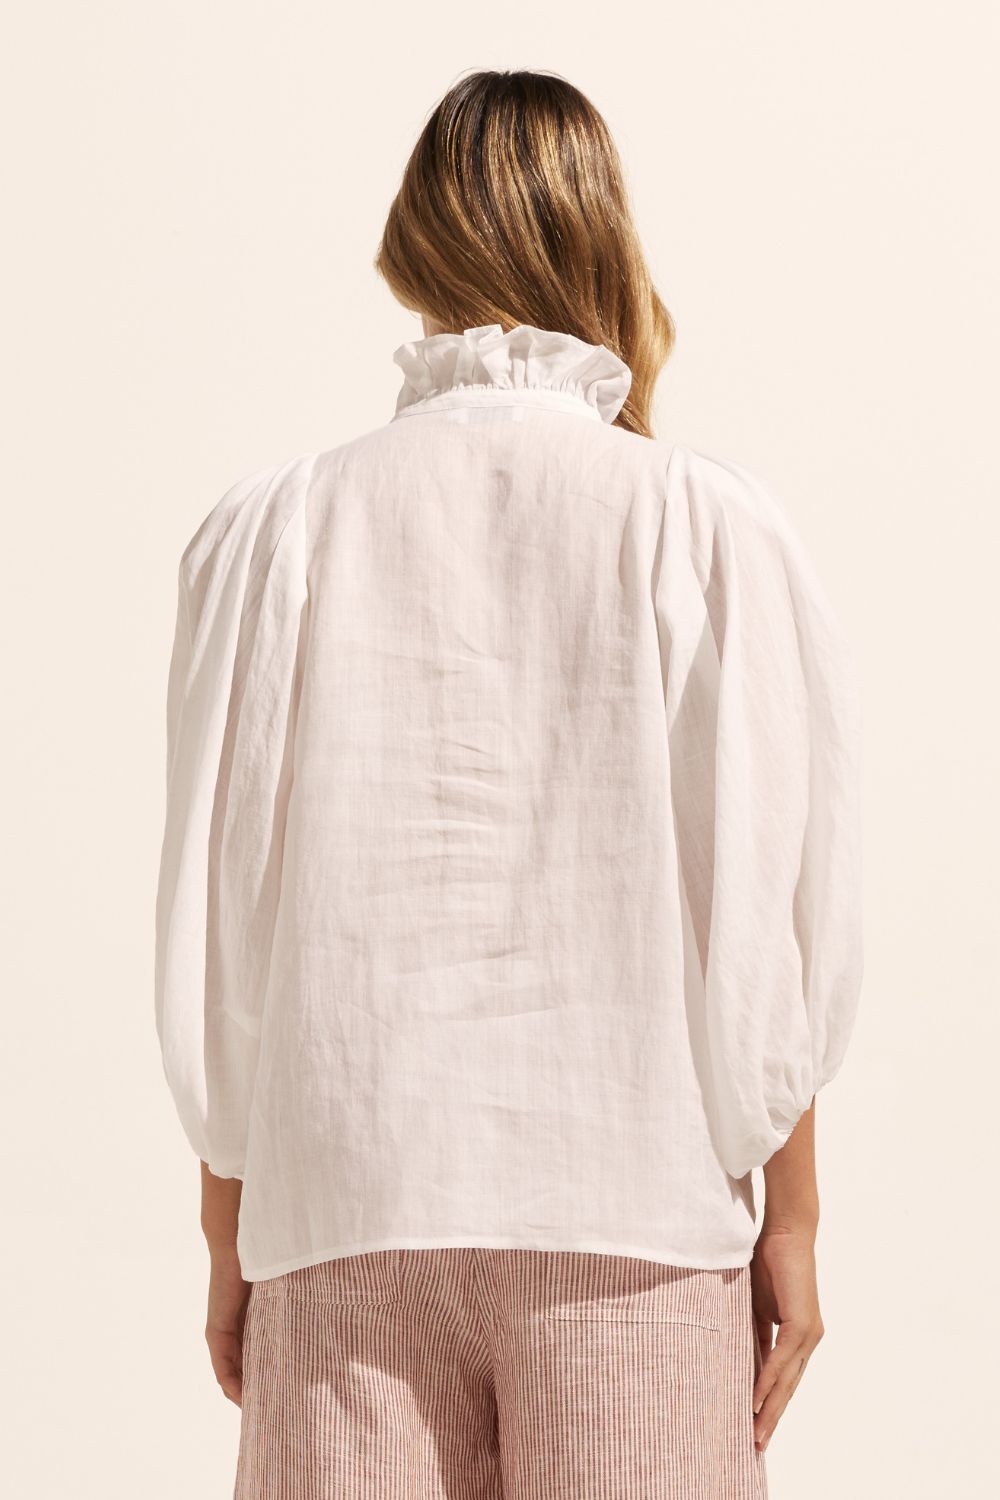 white, ruffle neck collar, buttons down centre, mid length sleeve, shirt, back view